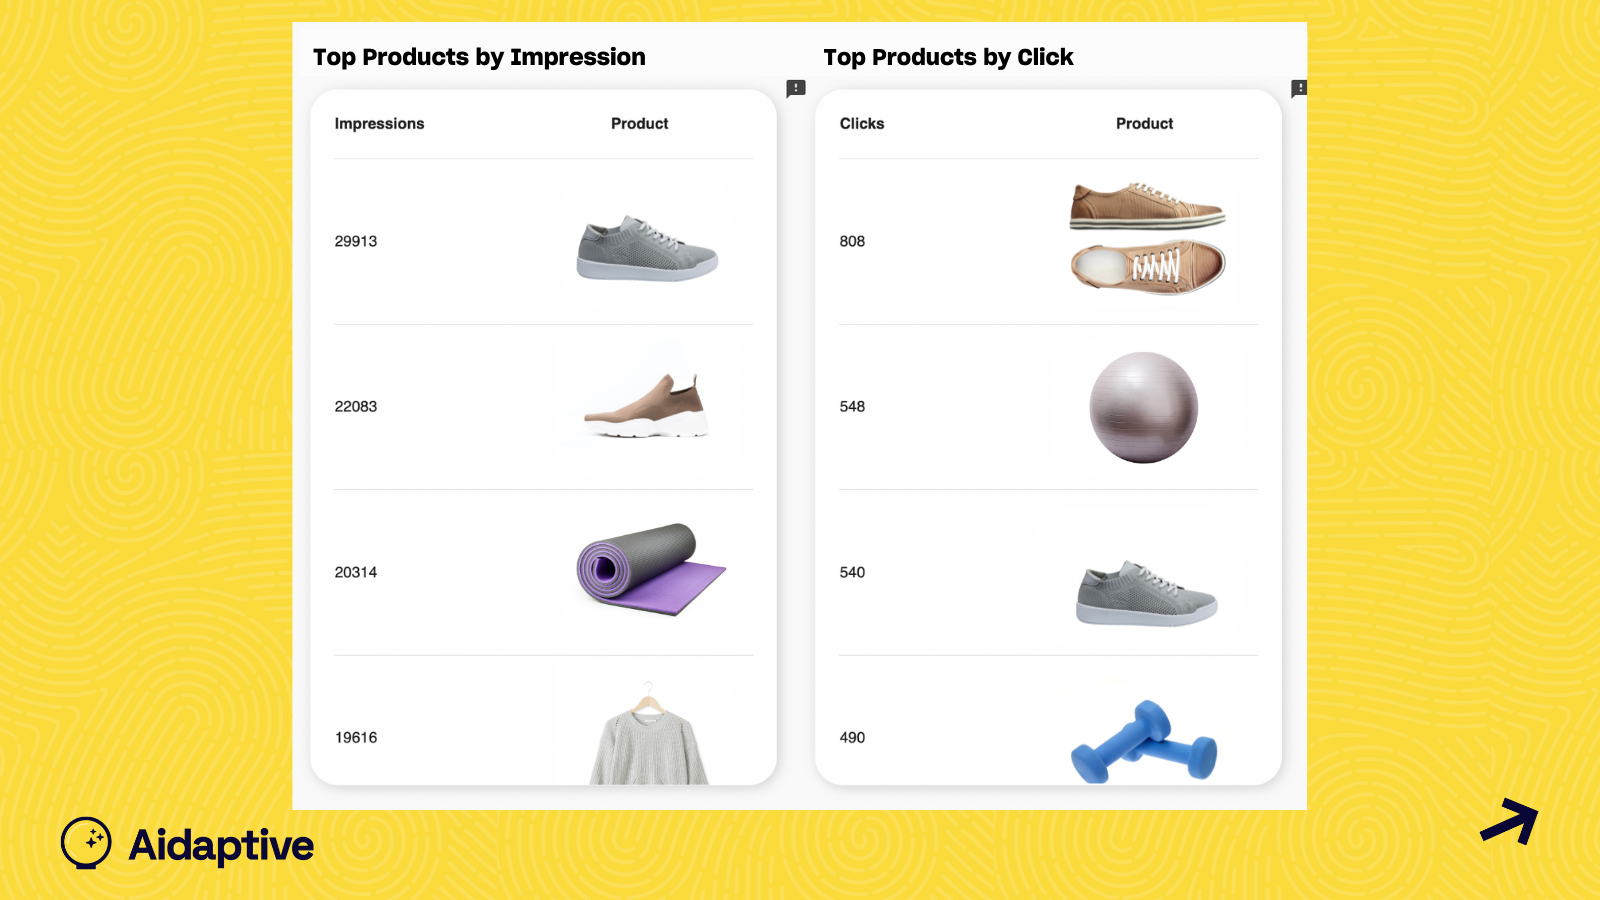 Top products by click by impression.